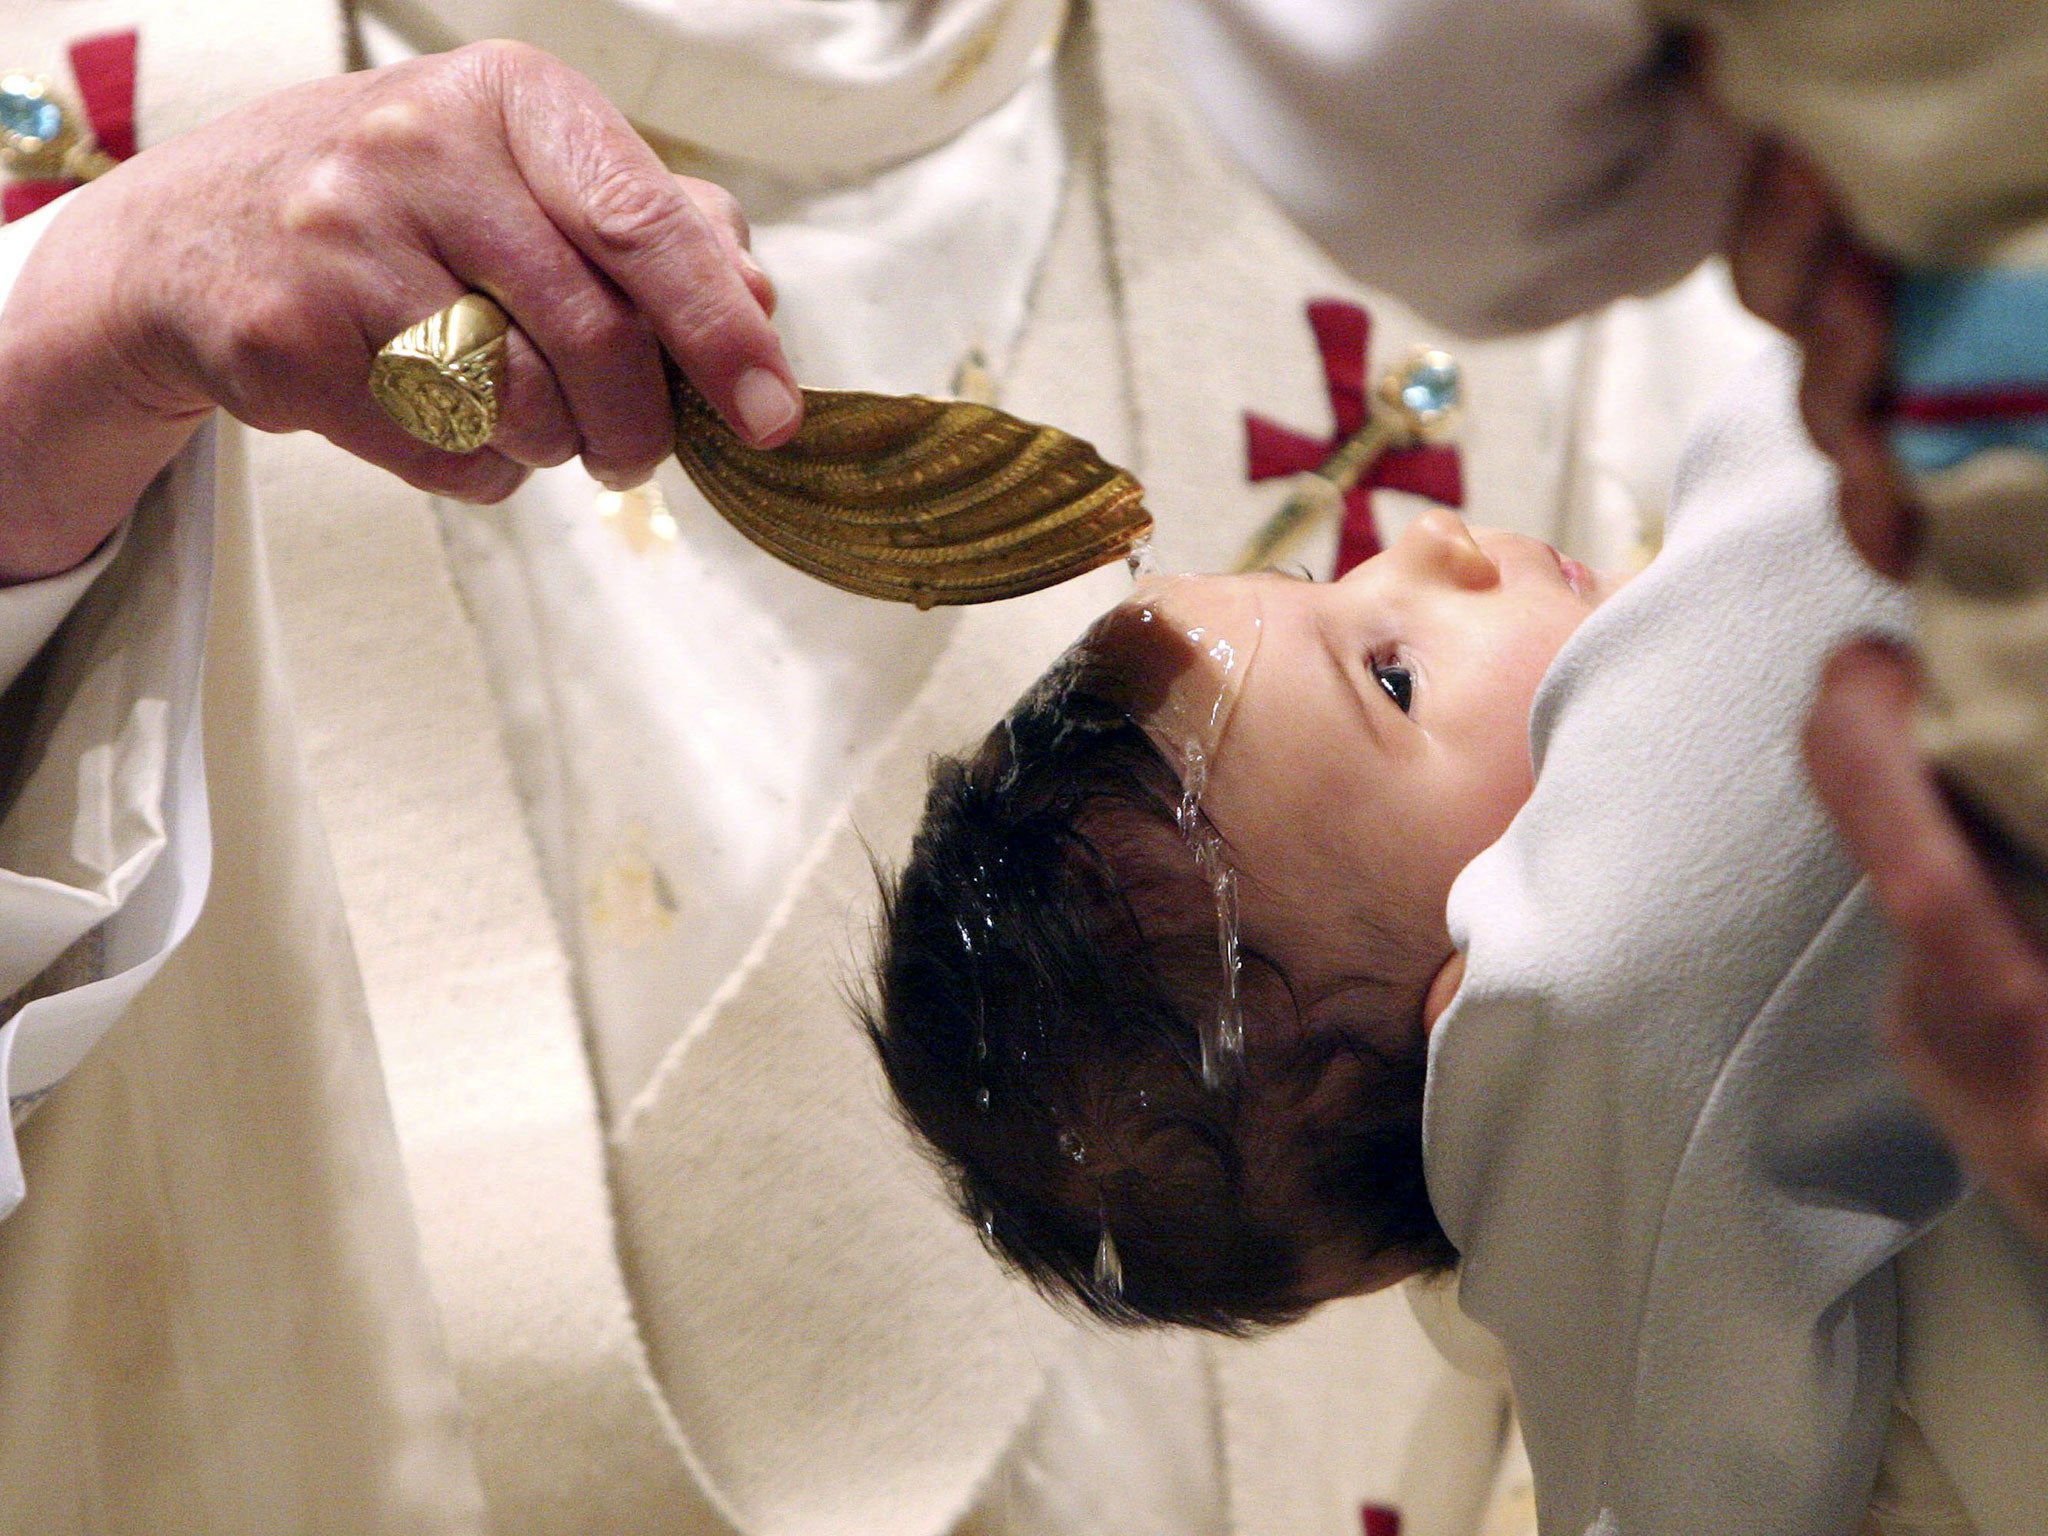 The Church of England has been accused of 'dumbing down' the baptism service, one of the cornerstones of the faith, by changing its wording so parents and godparents no longer have to 'repent sins' and 'reject the Devil'